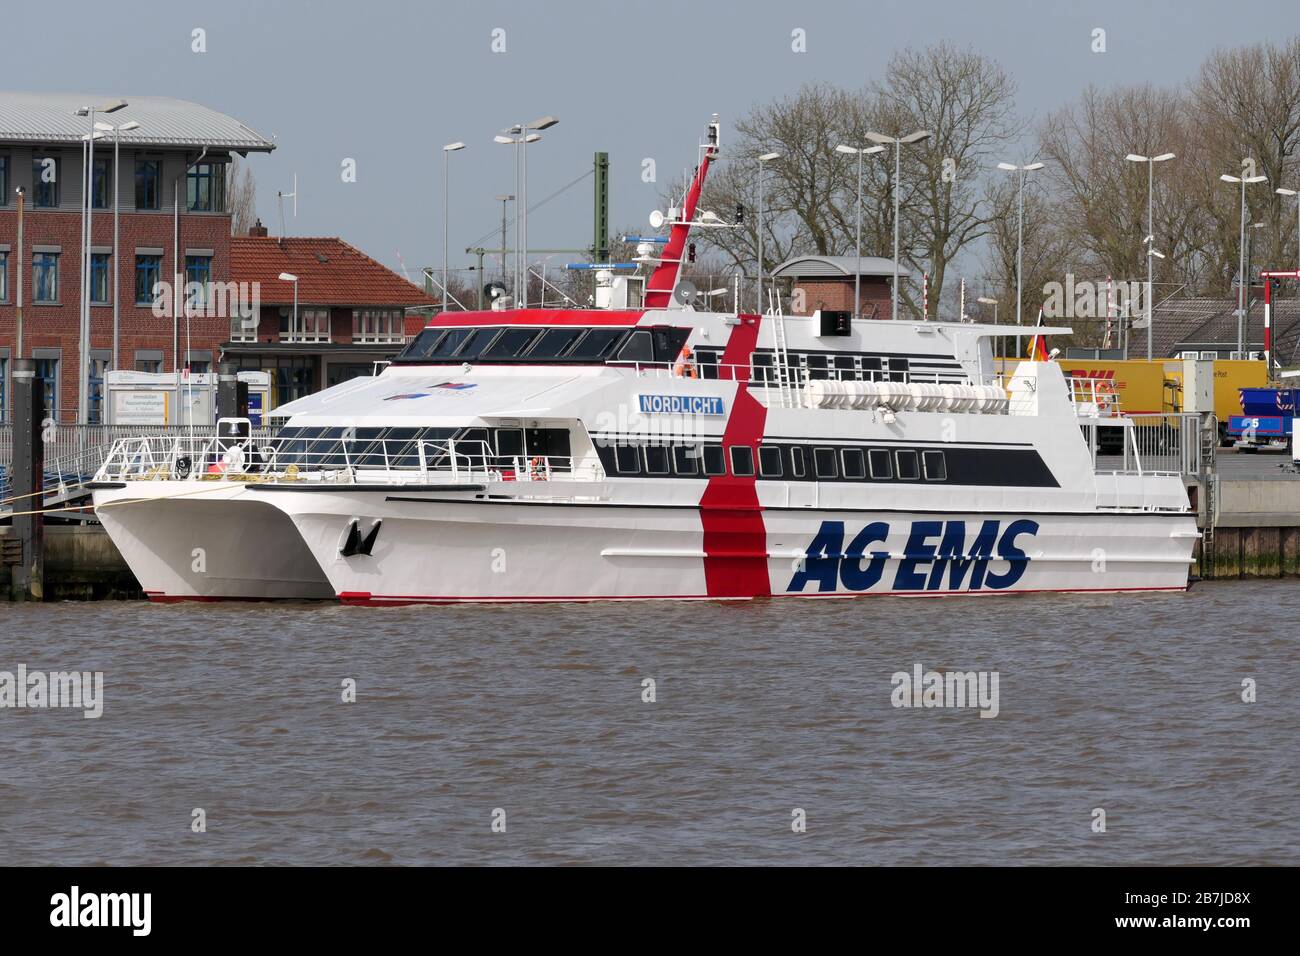 The passenger ferry Nordlicht will be in the port of Emden on February 29, 2020. Stock Photo